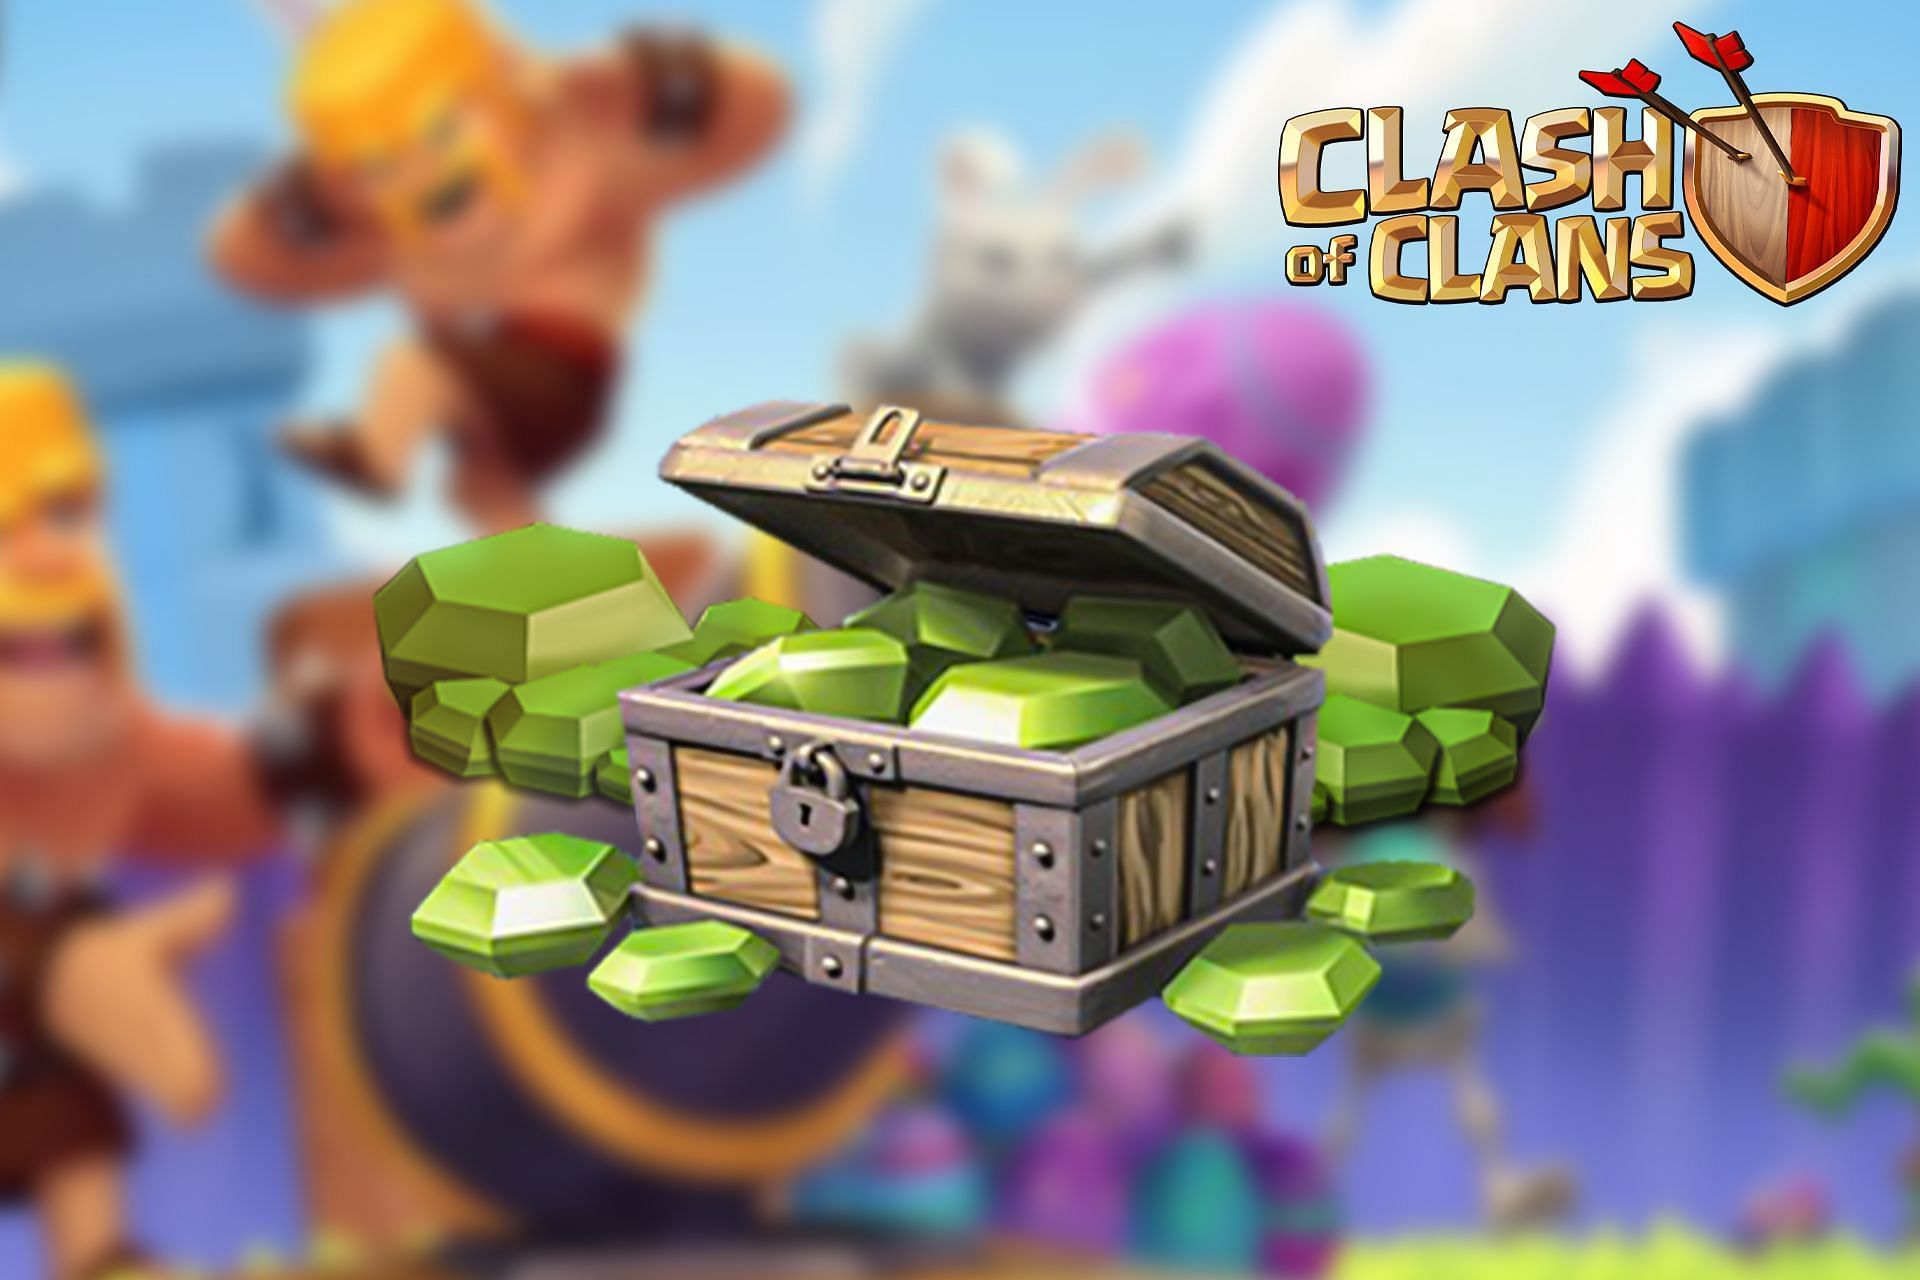 Clash of clans free gems mac download parallel access